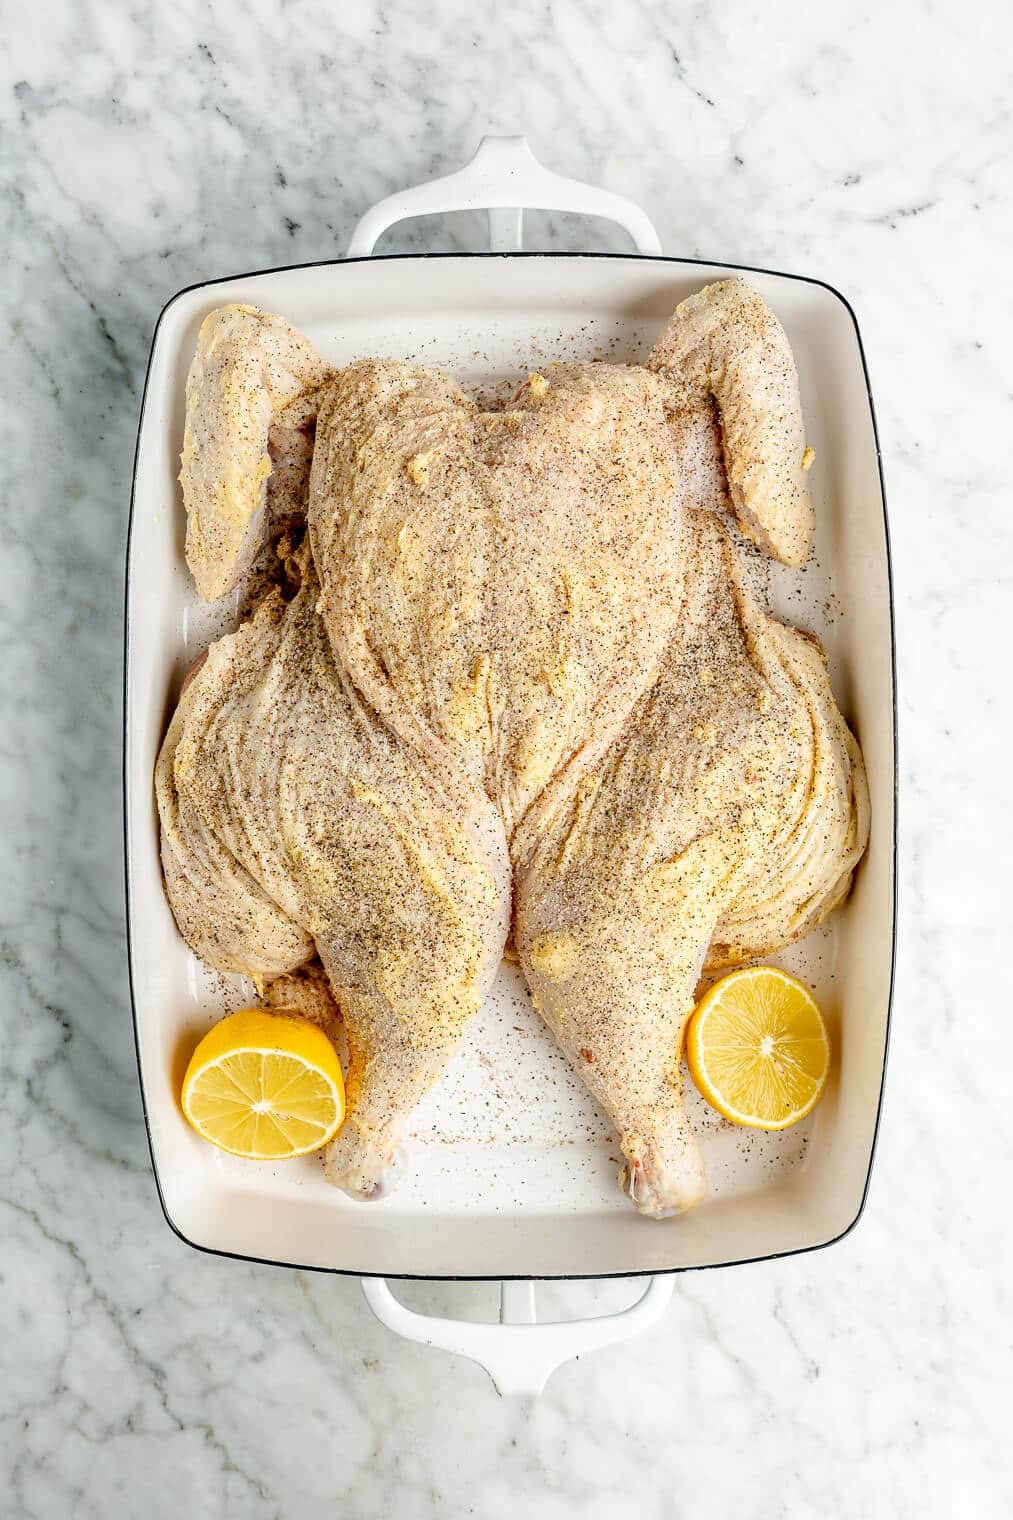 A raw spatchcocked chicken rubbed with butter and seasoned with salt and pepper in a white casserole dish next to two lemon halves.